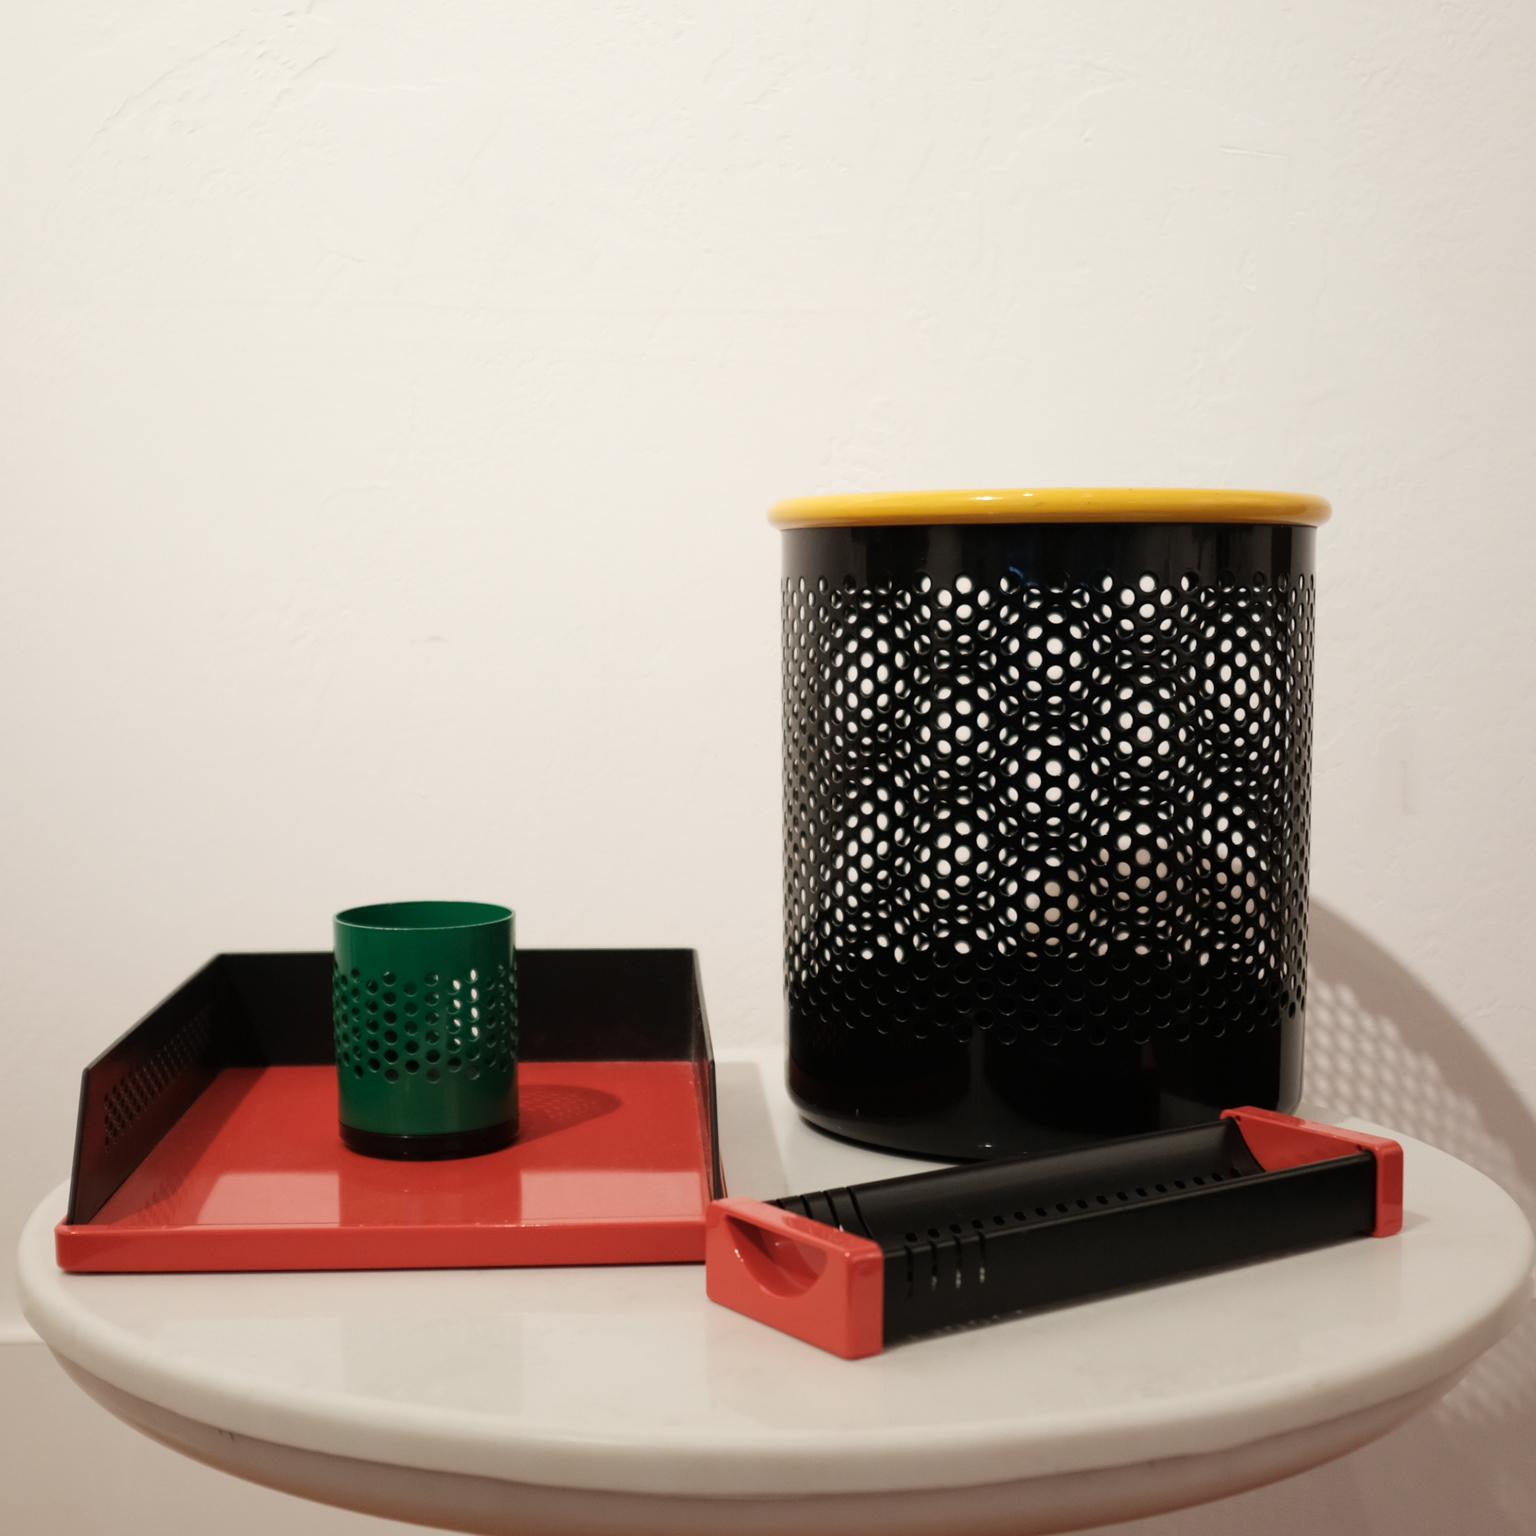 Postmodern Italian desk set, including a letter tray, pencil cup, catchall with card holder and a wastepaper basket. Perforated metal with plastic. Designed by Barbieri & Marianelli for Rexite, Italy, 1981.